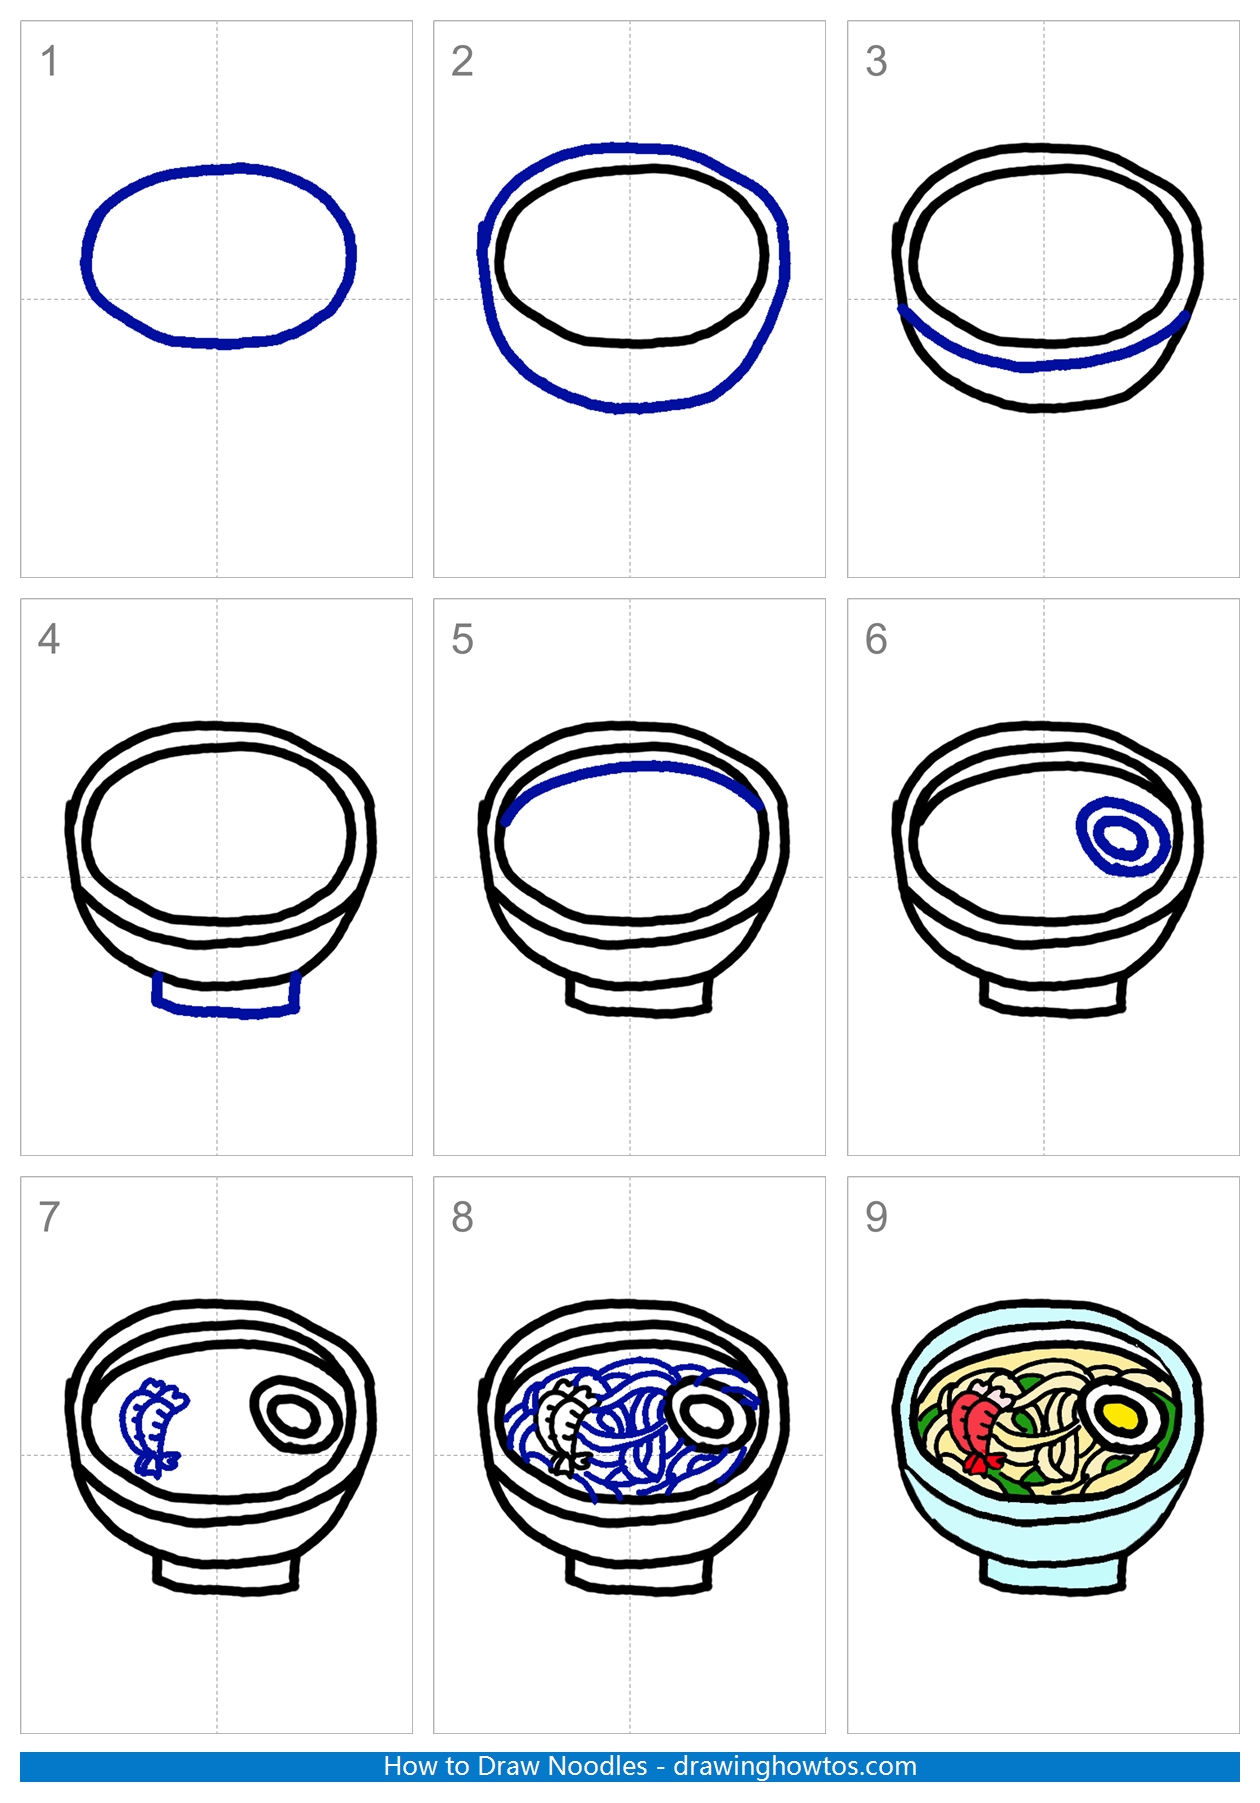 How to Draw Noodles Step by Step